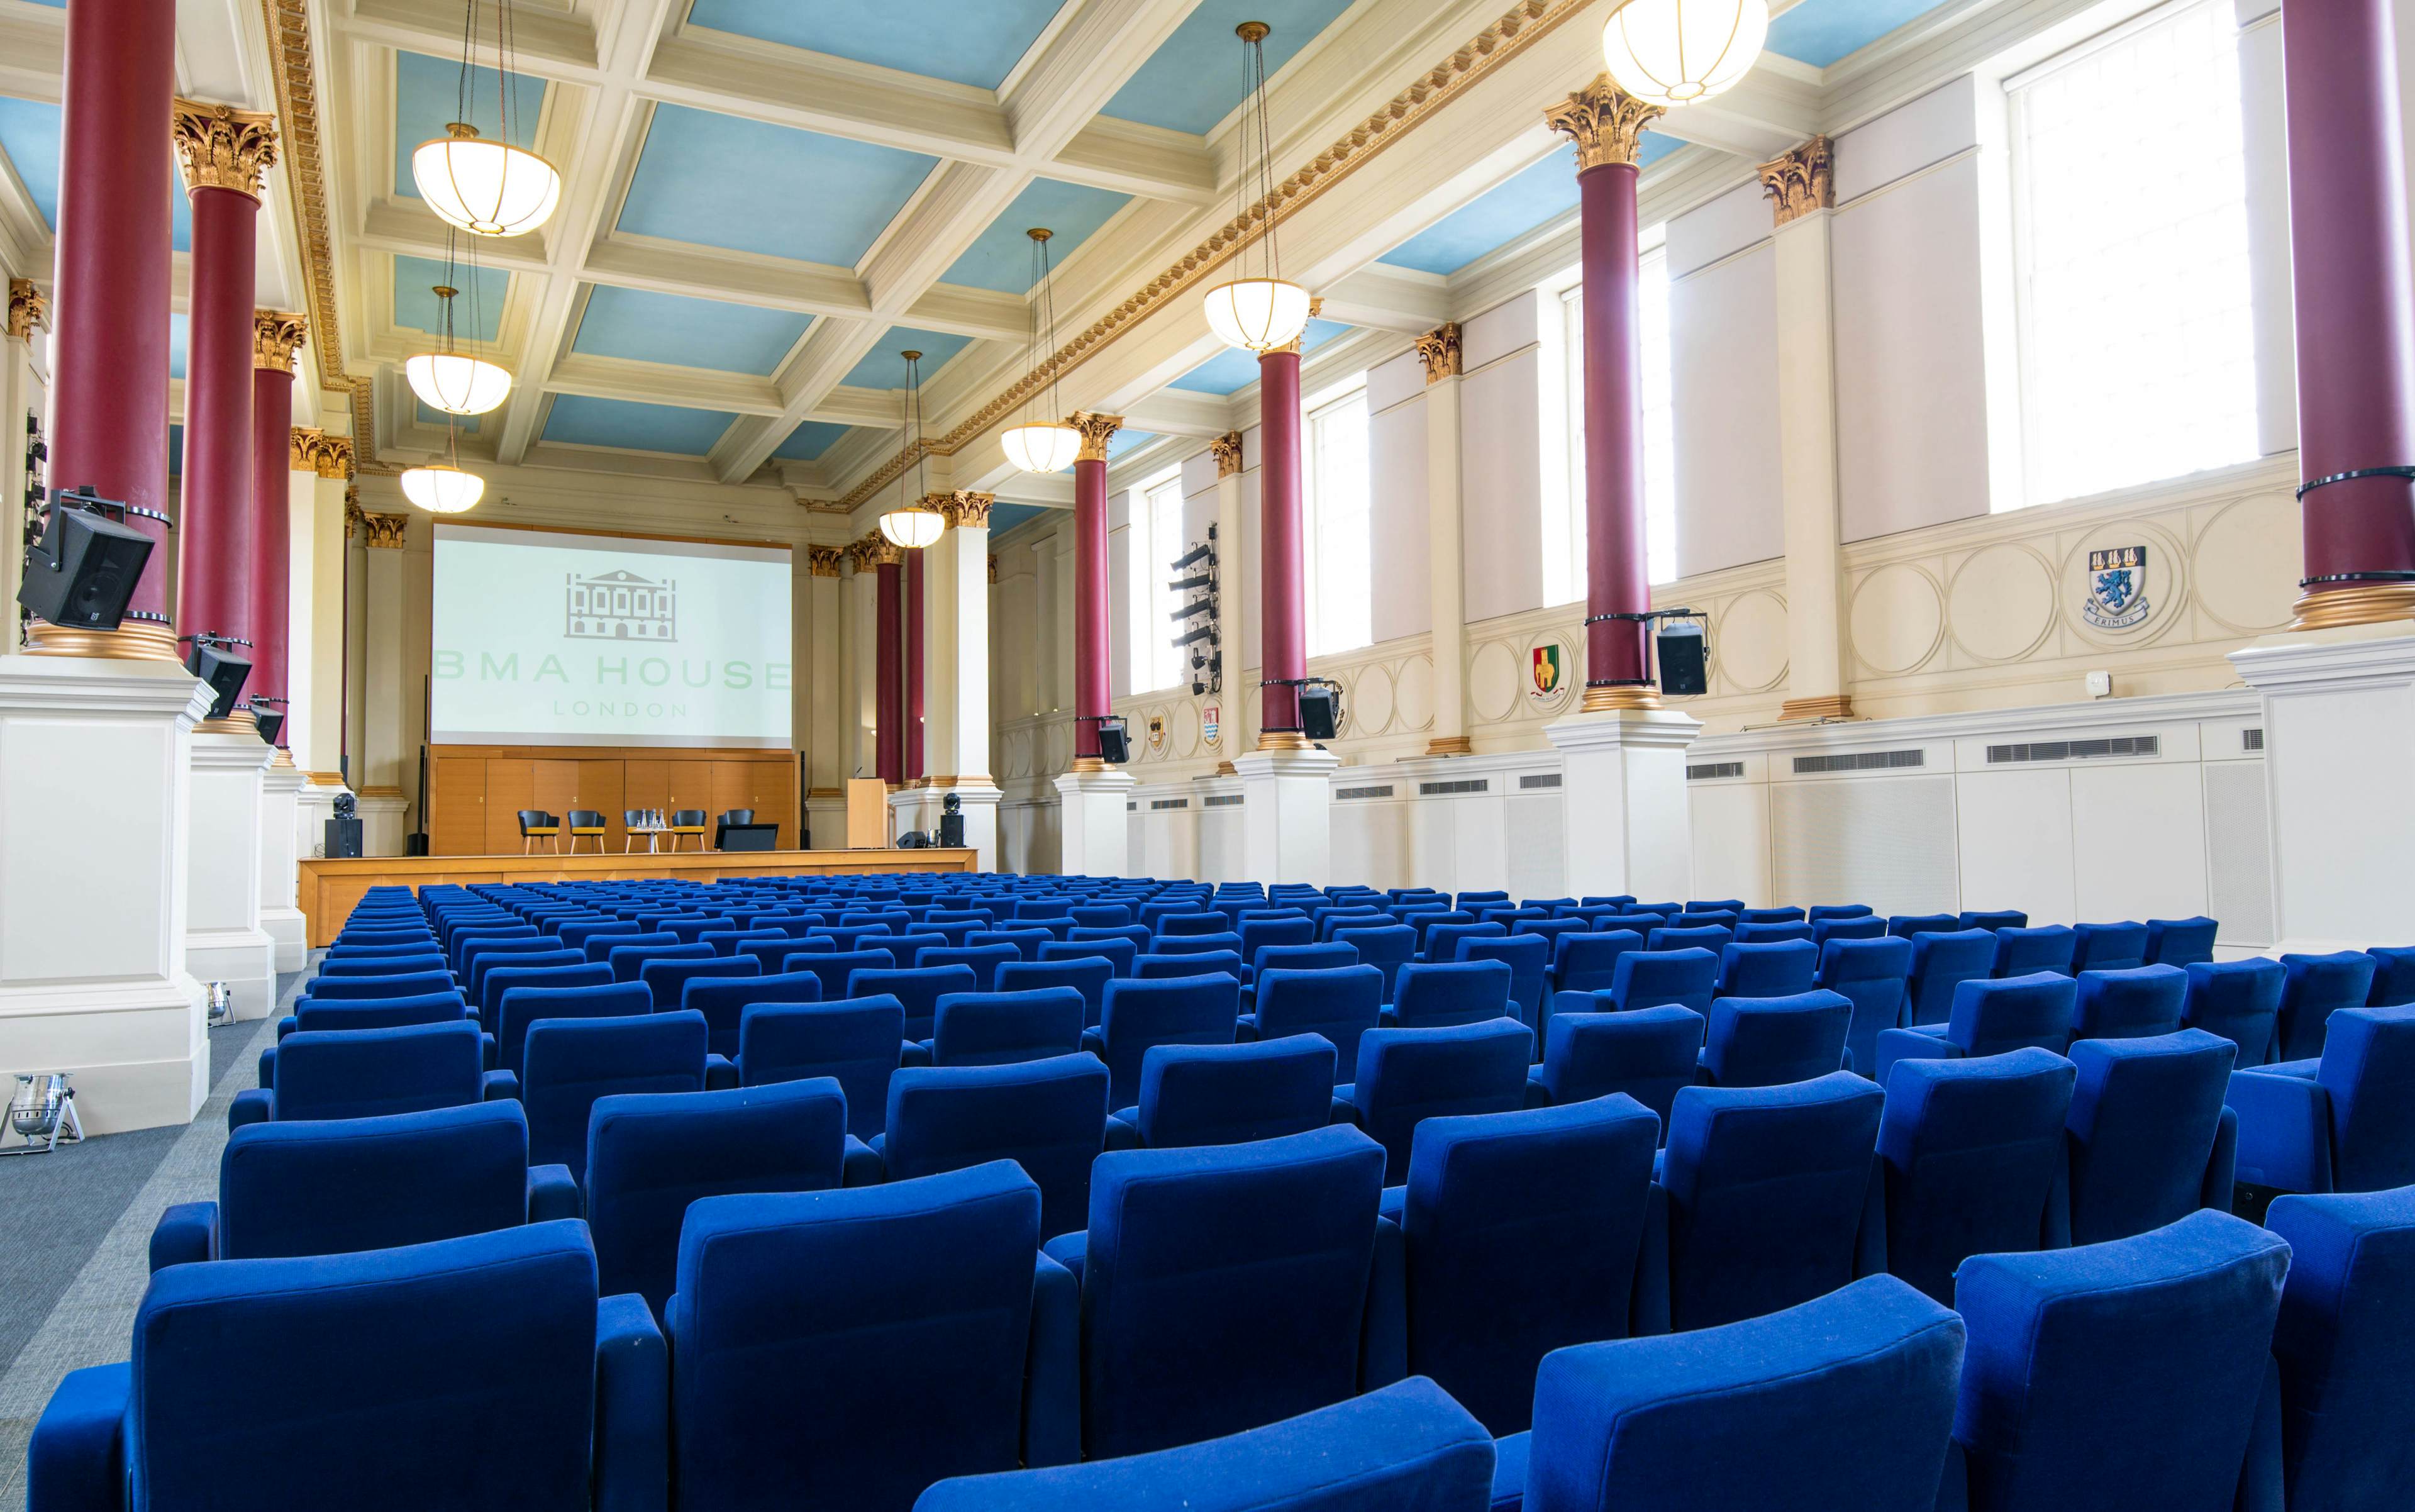 BMA House - Great Hall image 1